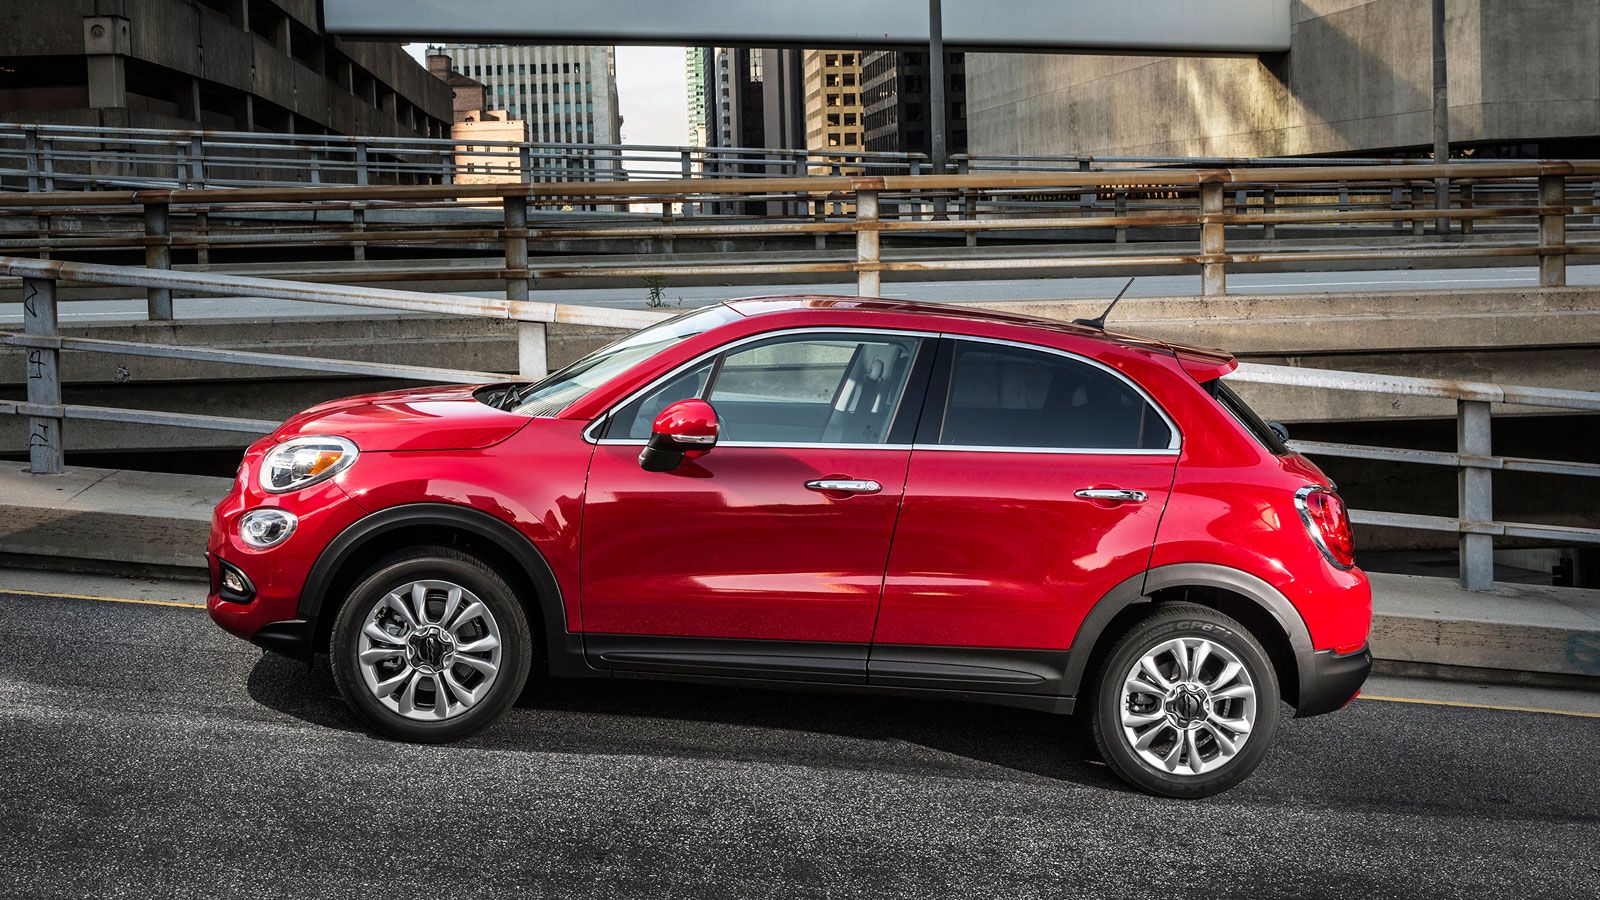 2018 Fiat 500X essentials: The best thing Fiat has going